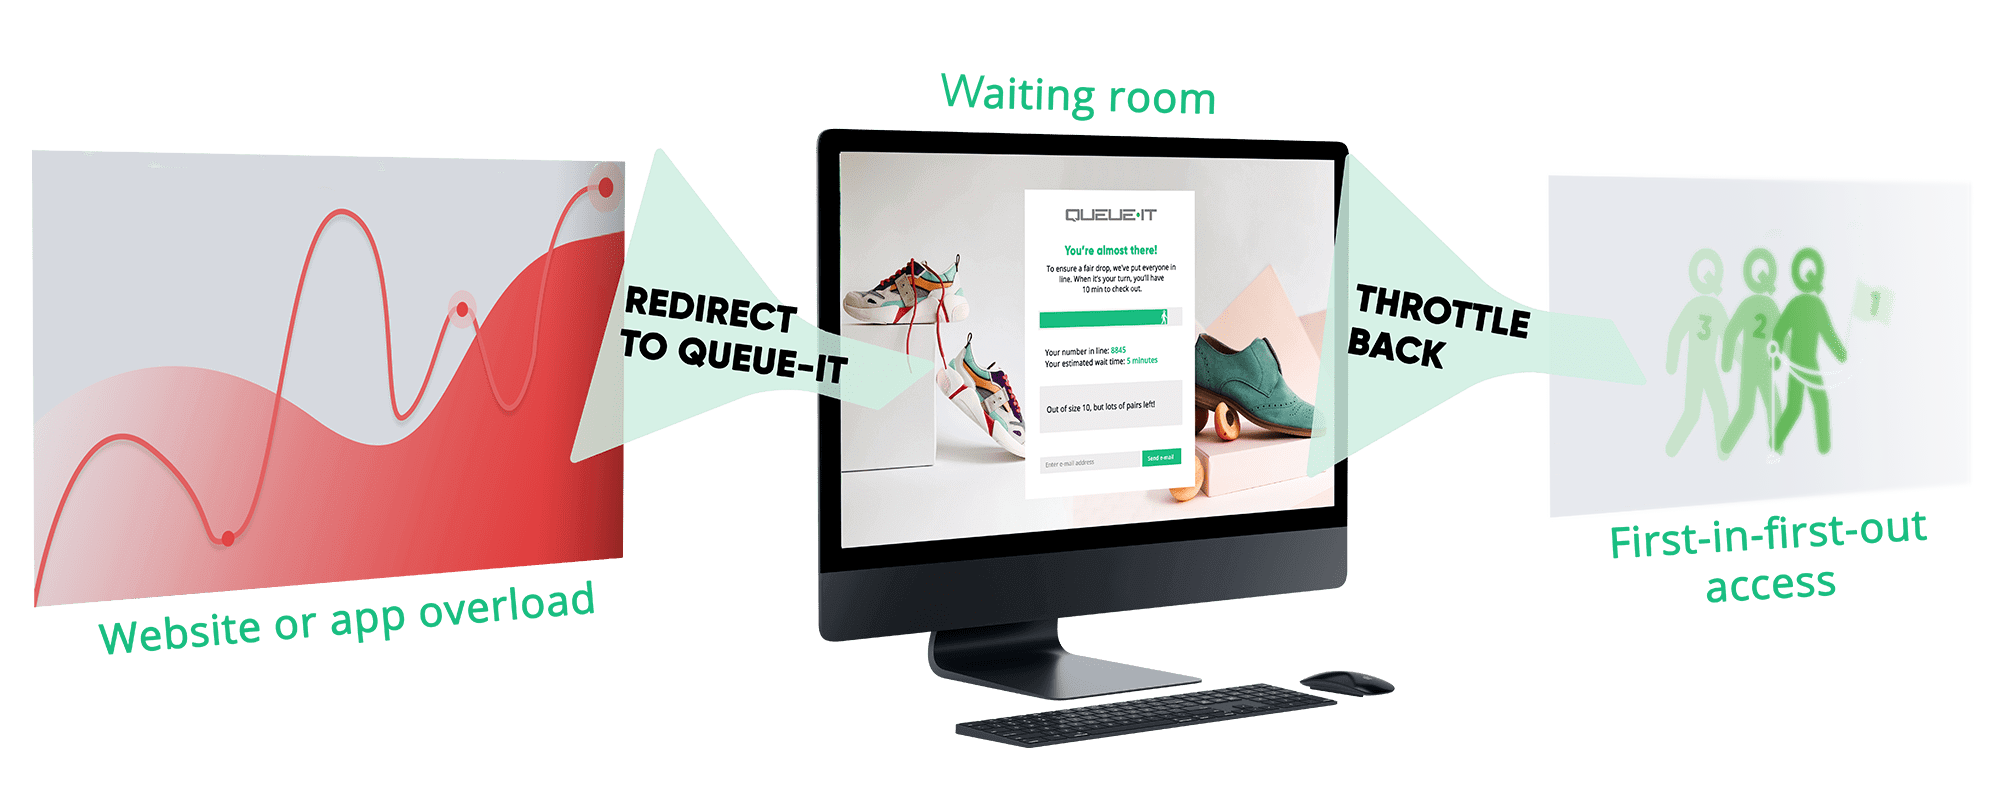 How Queue-it's Virtual Waiting Room Works